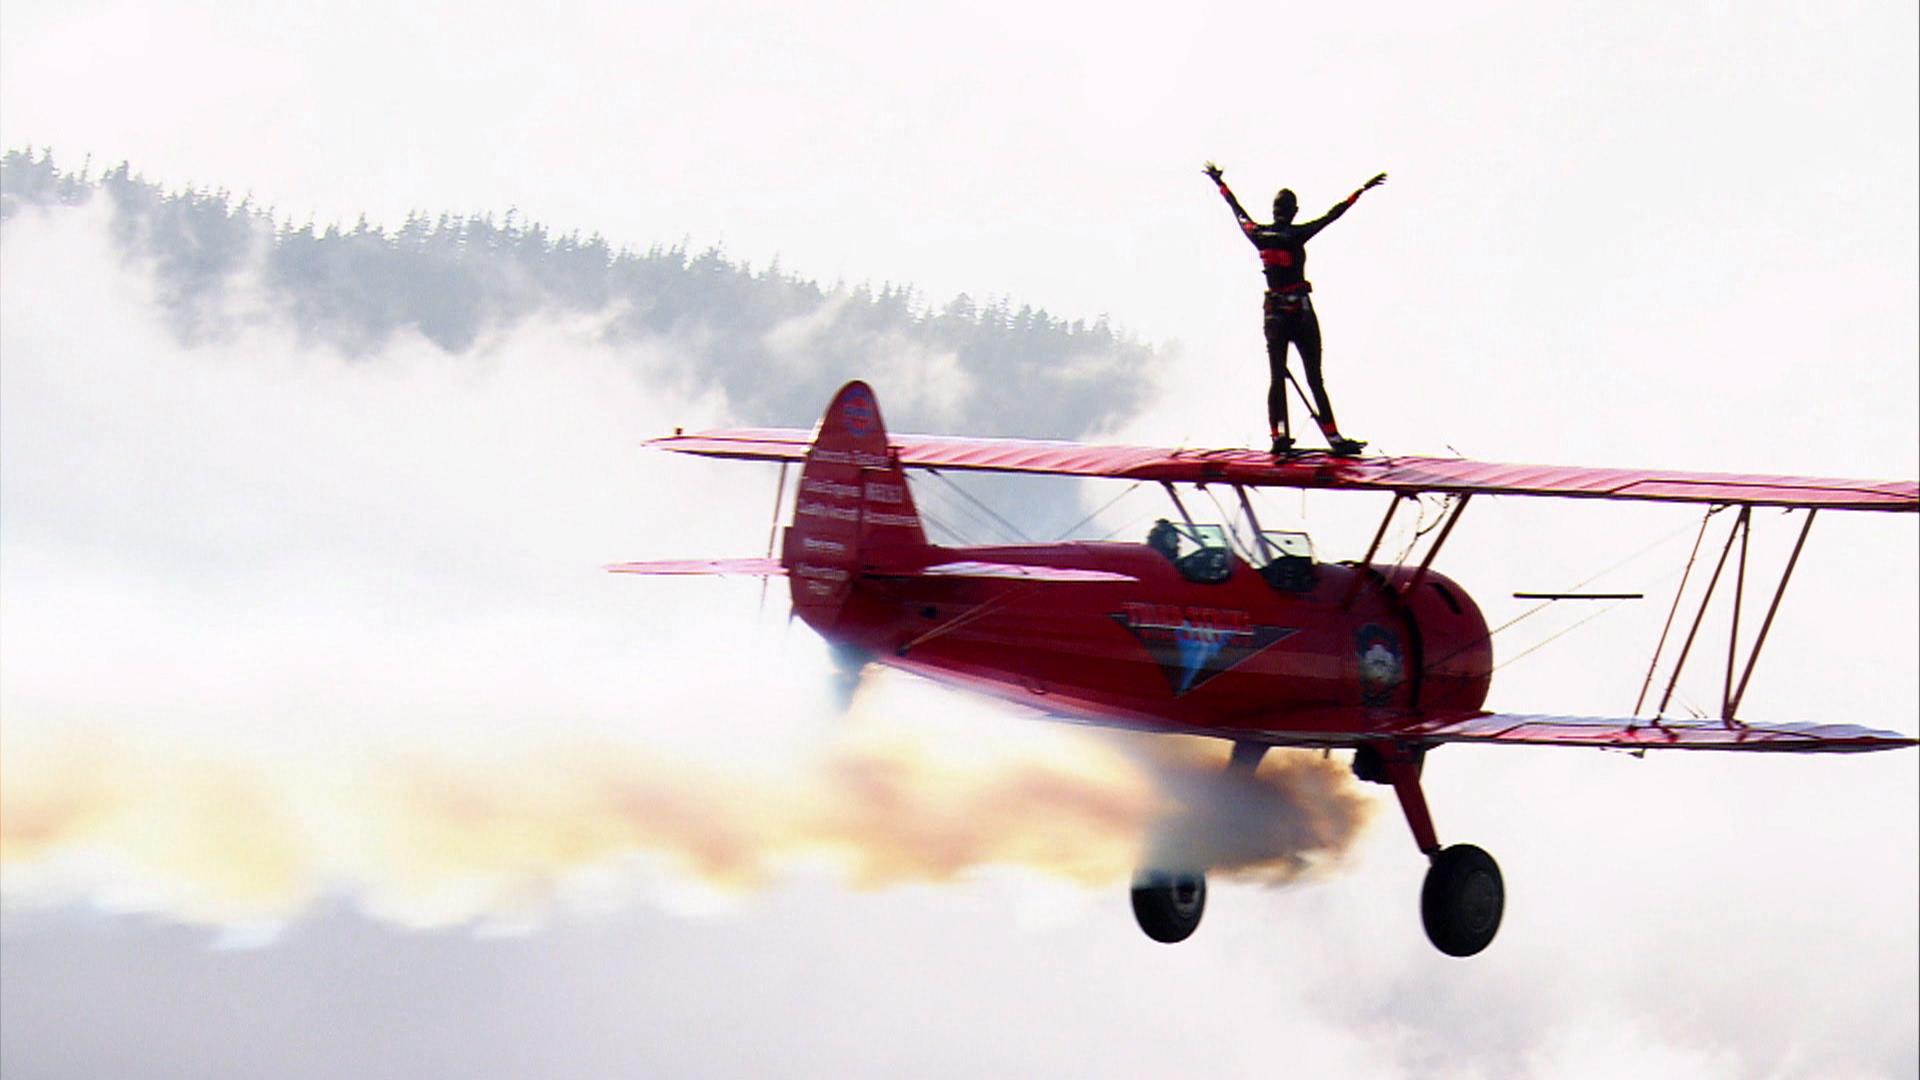 Meet one of the last remaining wing walkers